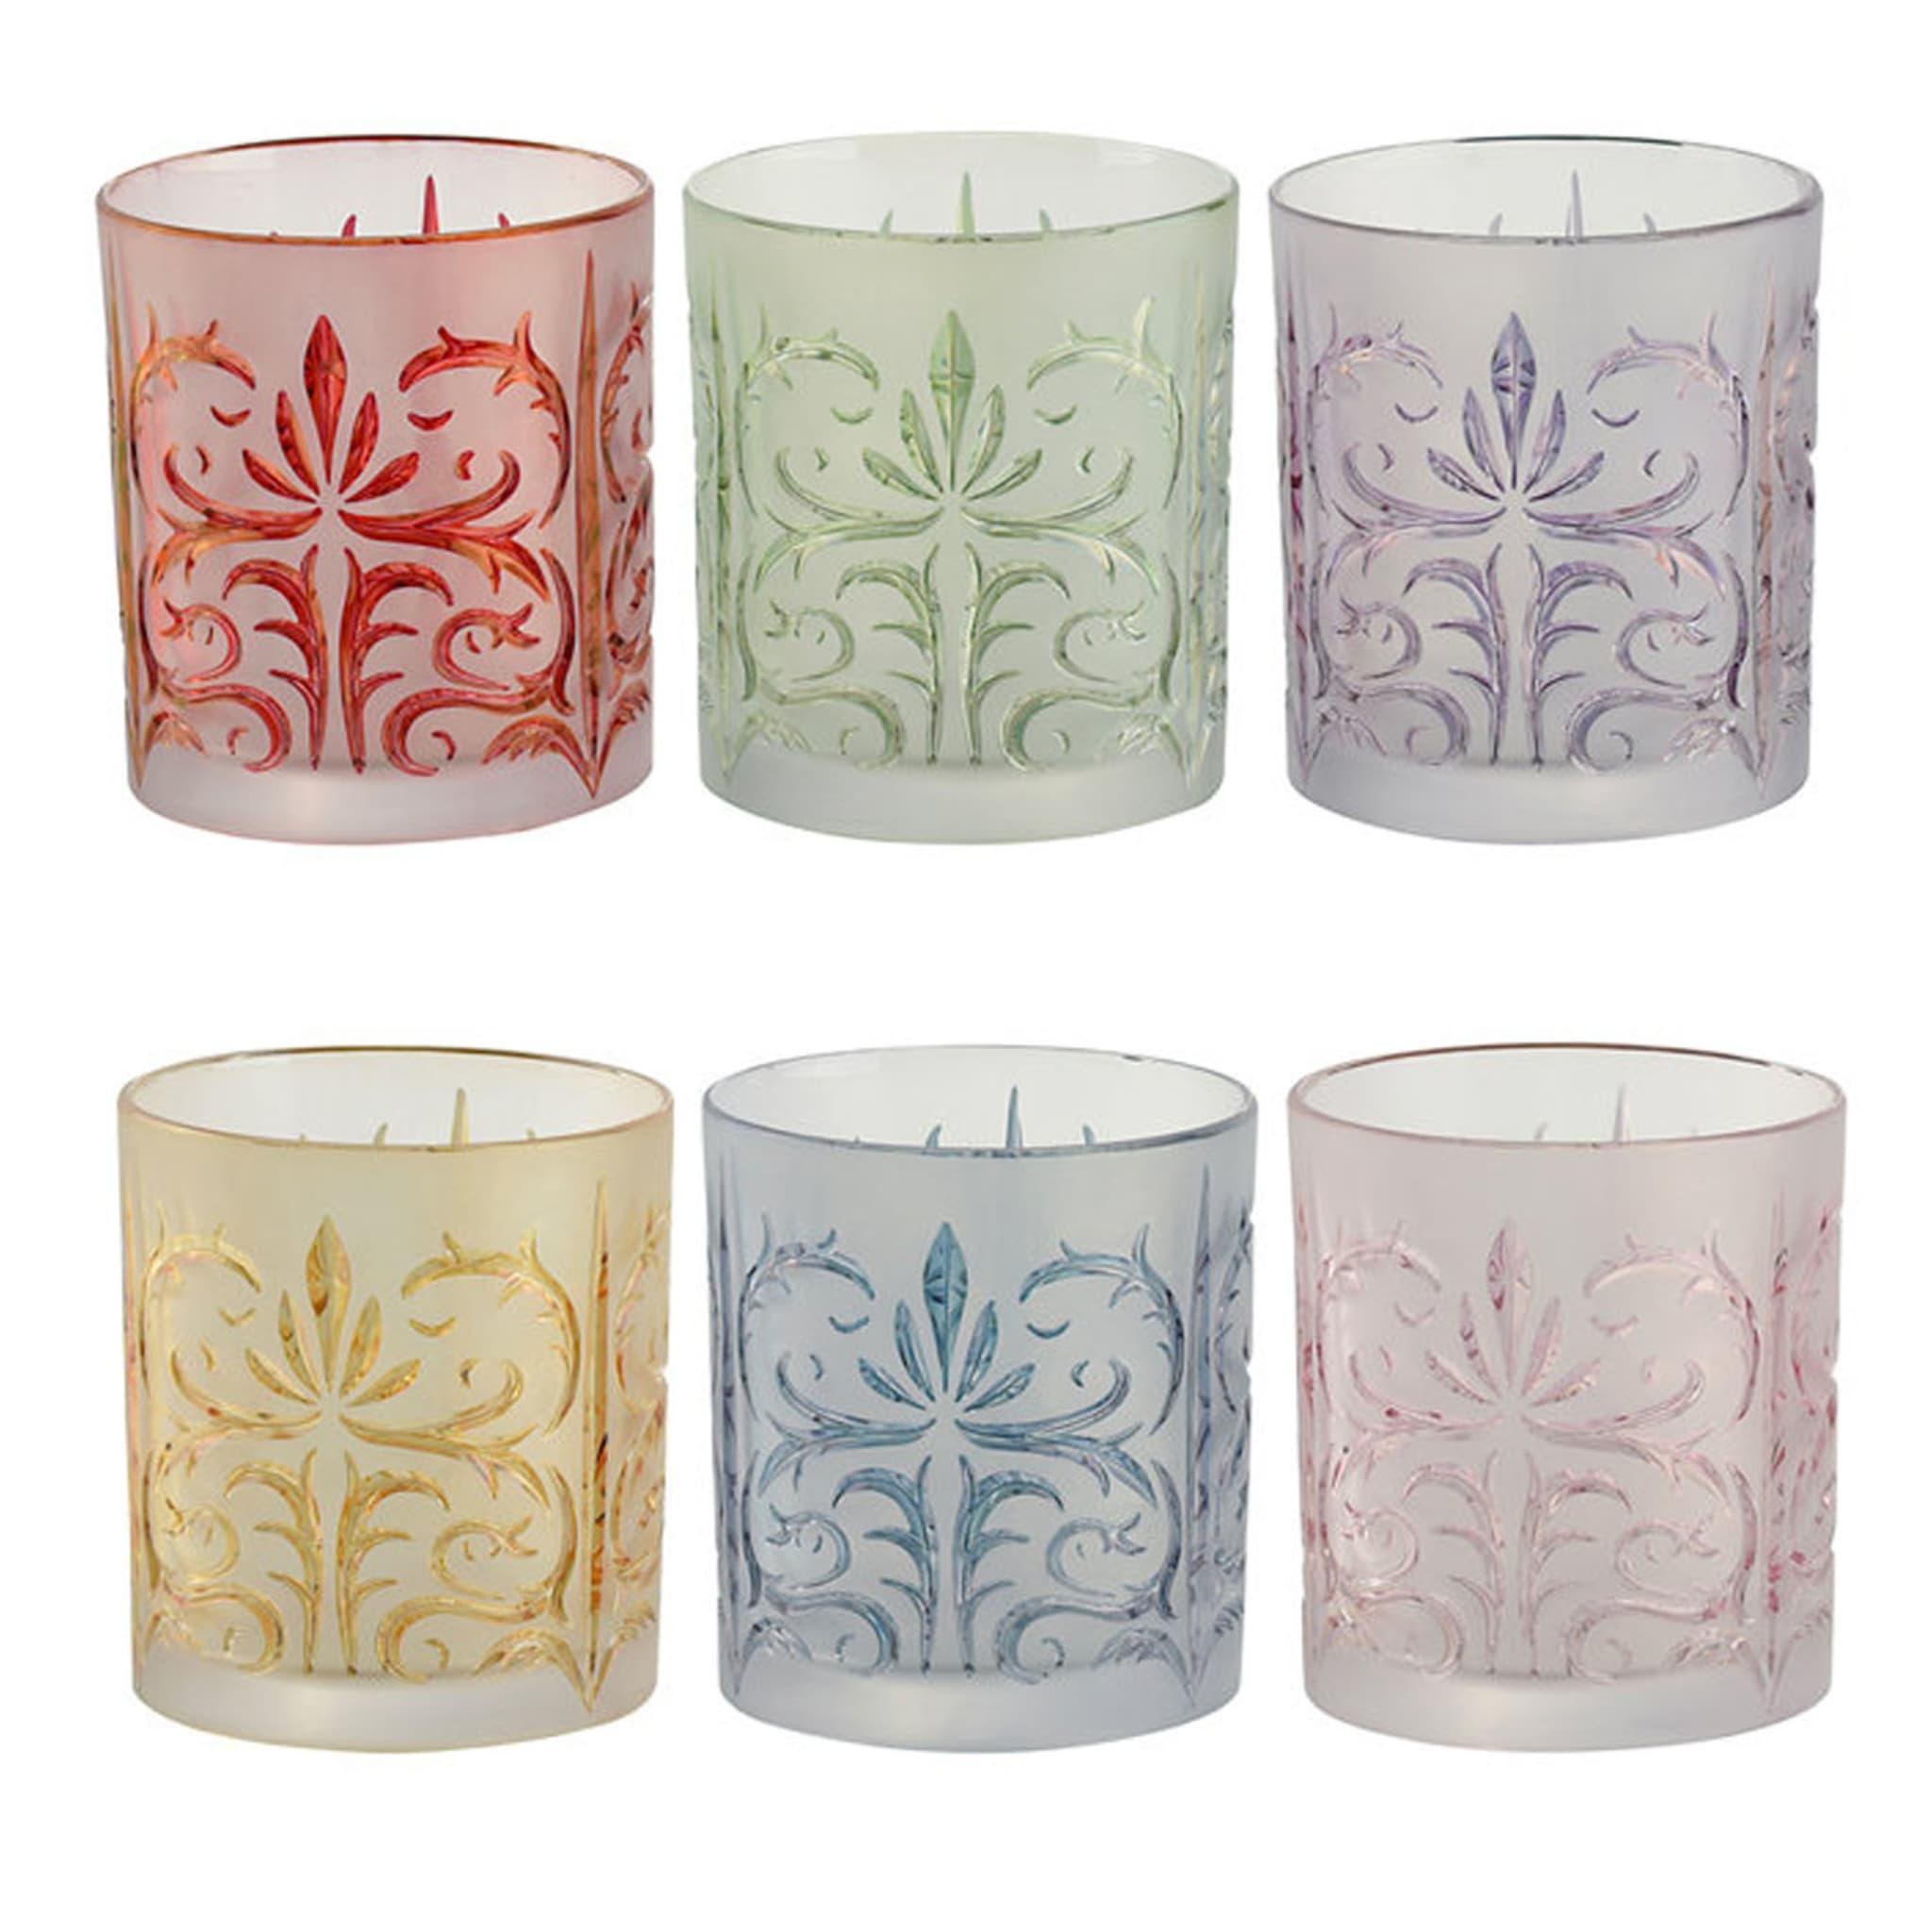 Part of the Tattoo Collection, this set of six water glasses is versatile and unique. The hand-decorated glass surface boasts a floral motif, stylized and timeless, each highlighted by a different color: red, mint, purple, gold, blue, and pink. An